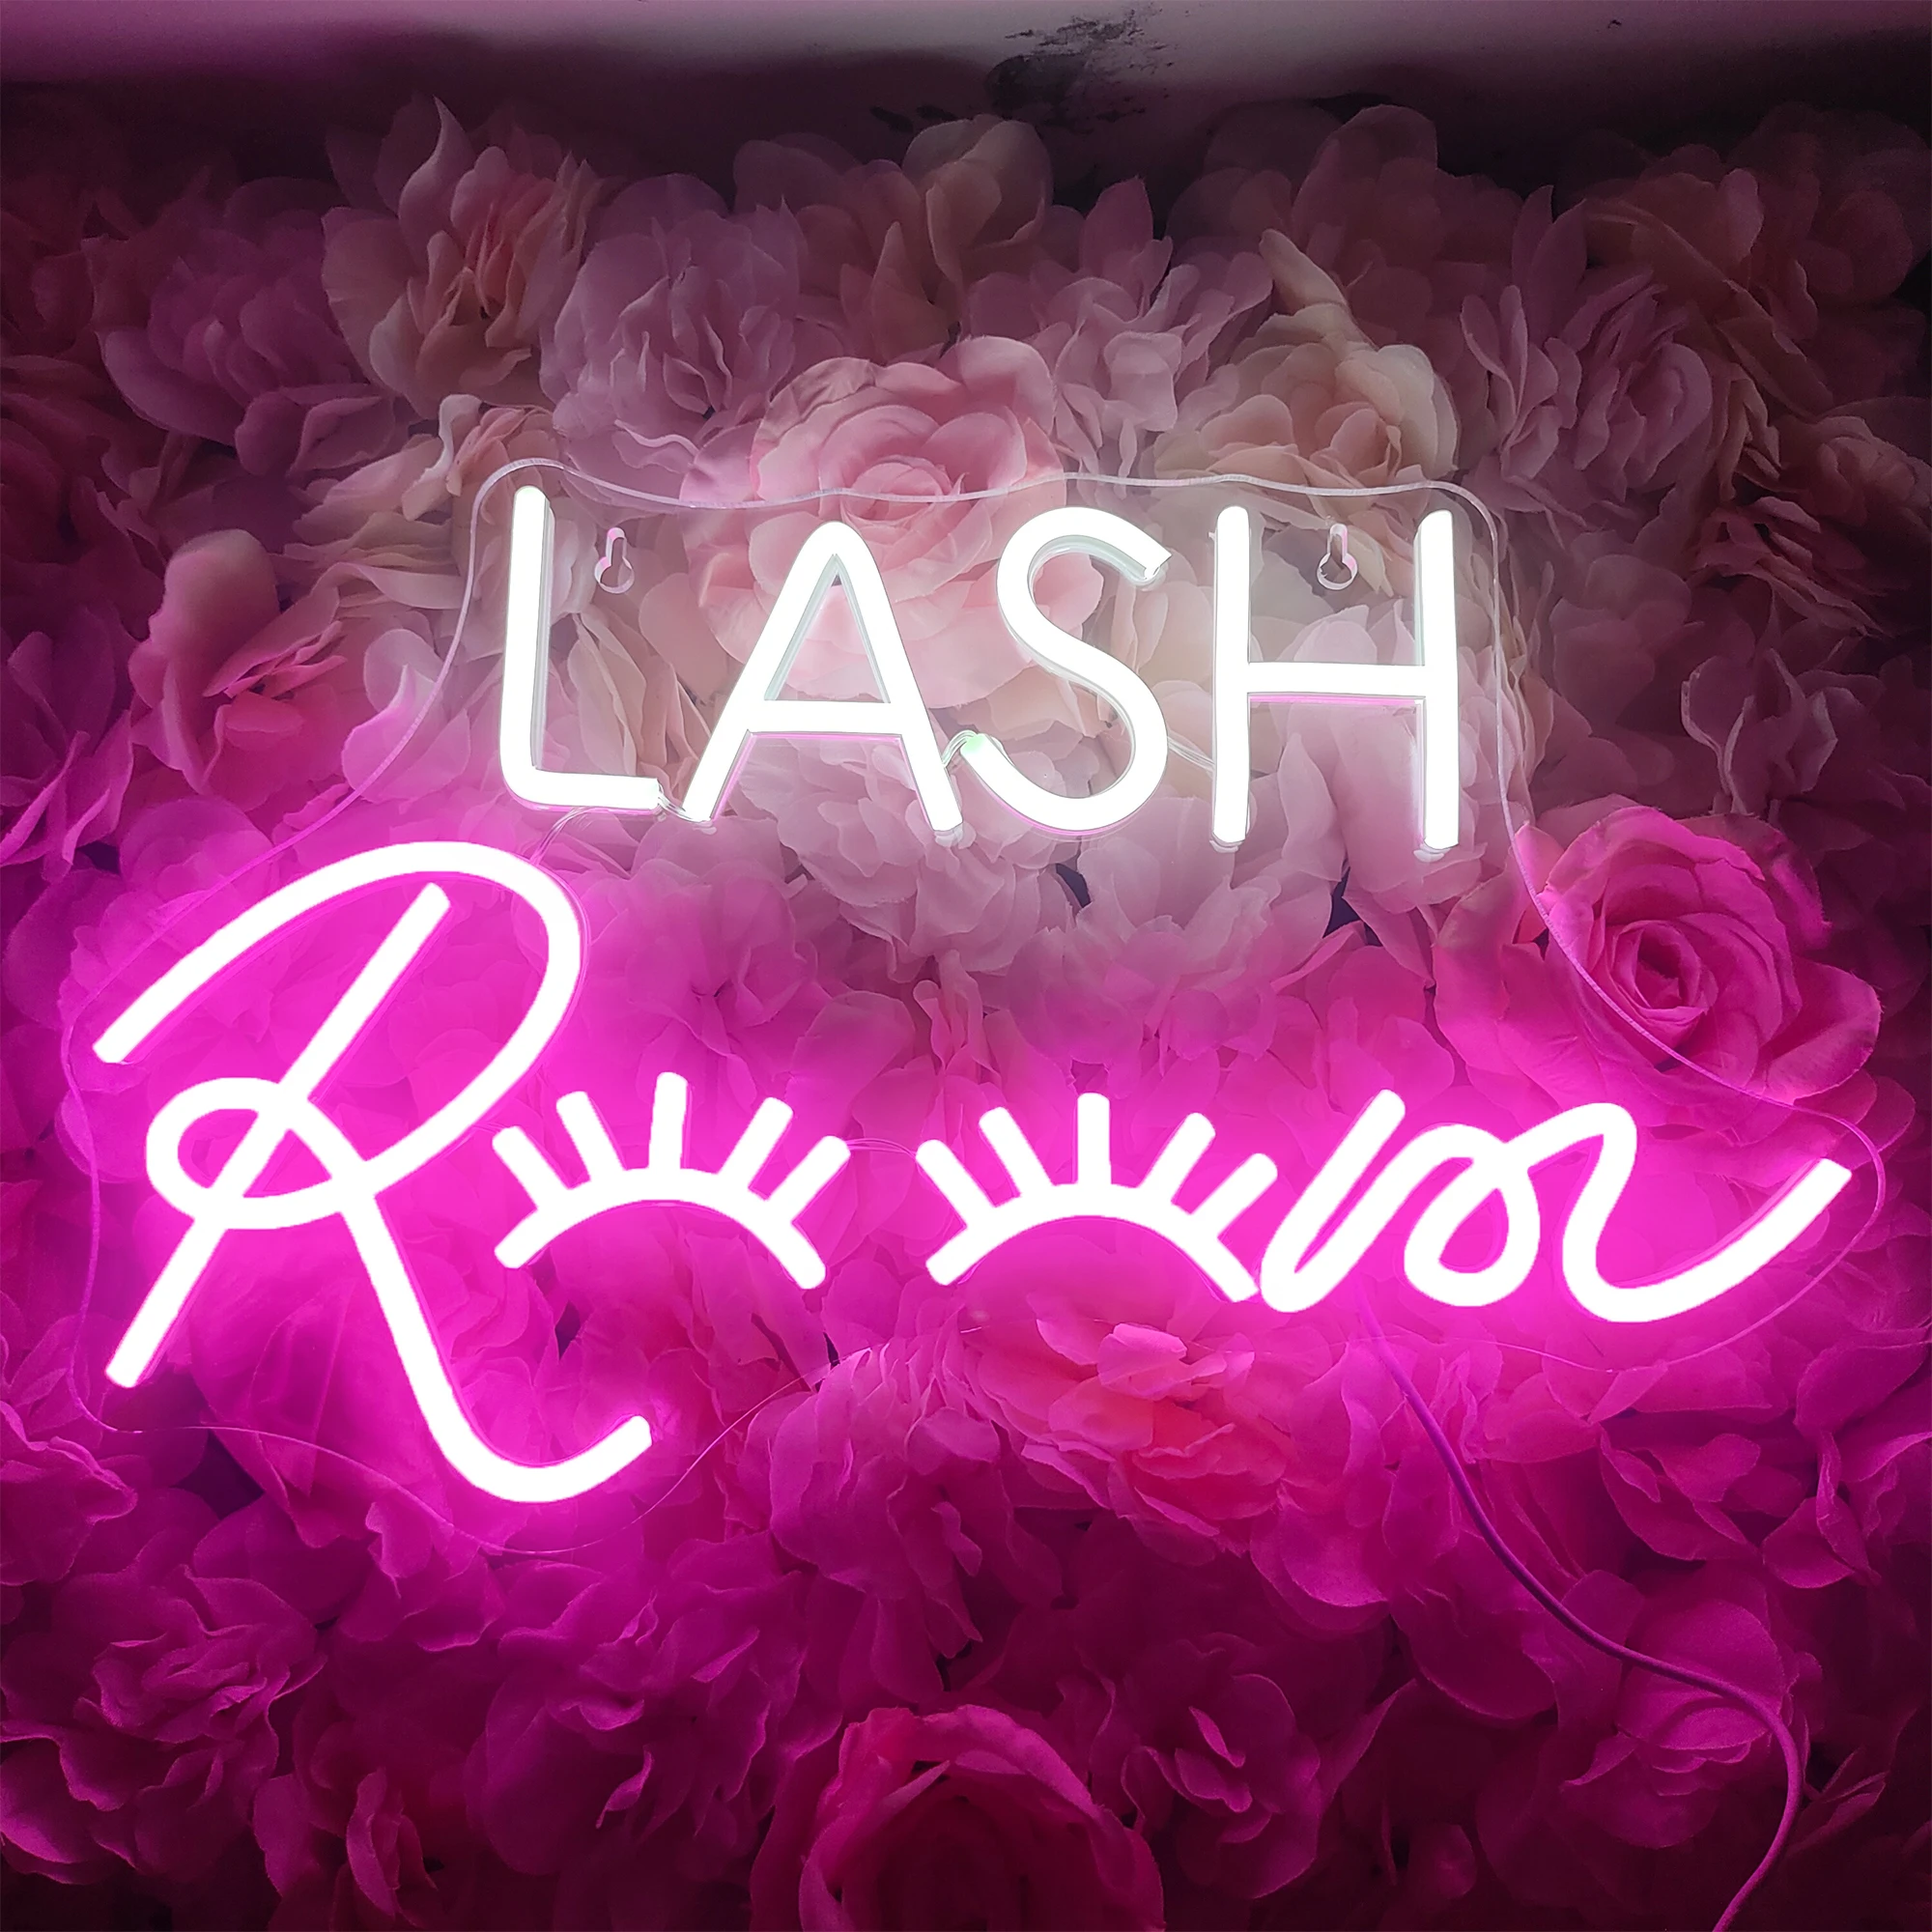 LED Neon Sign Lights LASH Room Decoration Wall Art Neon Light Beauty Salon Decor Pink Neon LED Sign Business Signboard LED Light take a seat sweet cheeks led neon sign usb powered neon lights for beautyroom salon decor home party room home decoration gifts